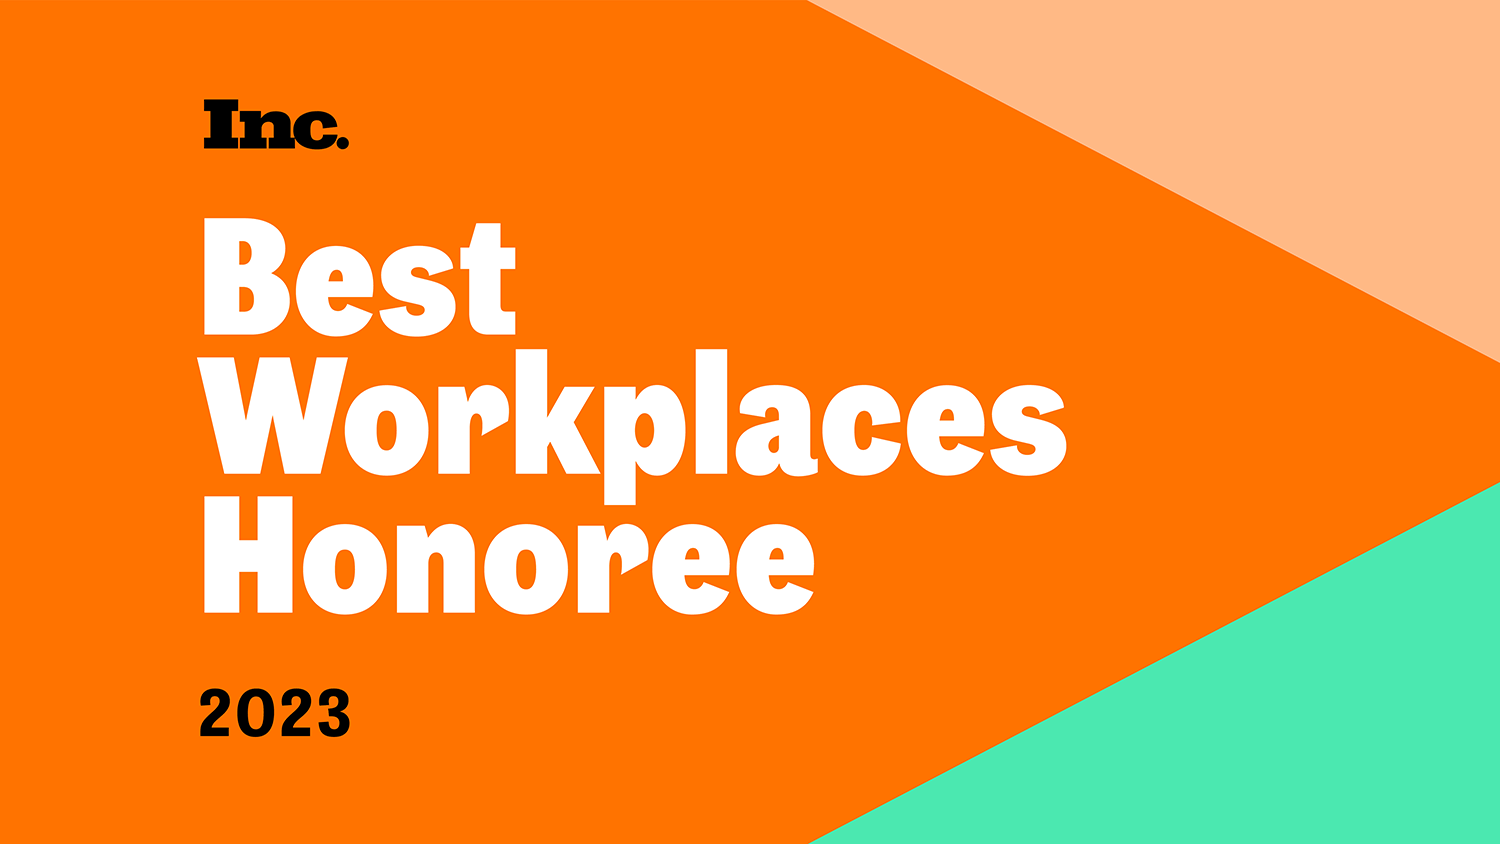 Inc. Best Workplaces Honoree 2023